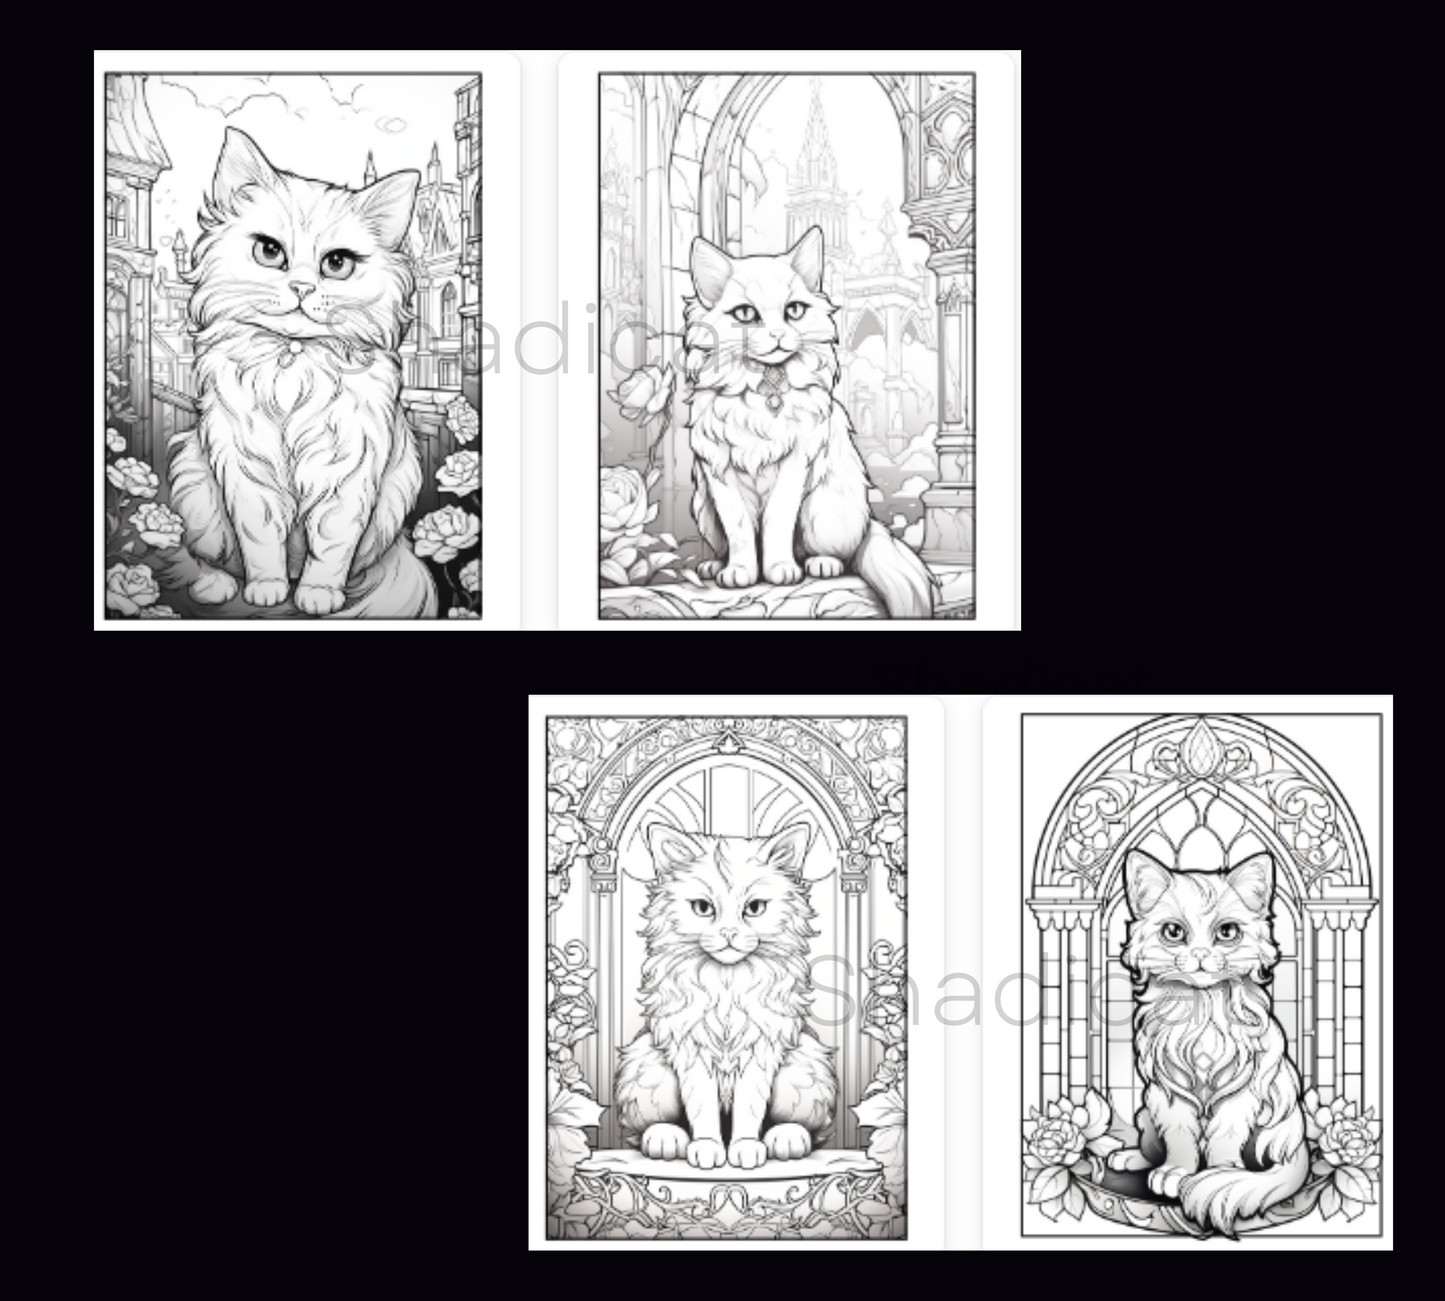 Adult Coloring Book | Cutest Cats Coloring Pages | Instant Download | Stress Relieving Craft | Printable Grayscale | Gifts For Cat Lovers